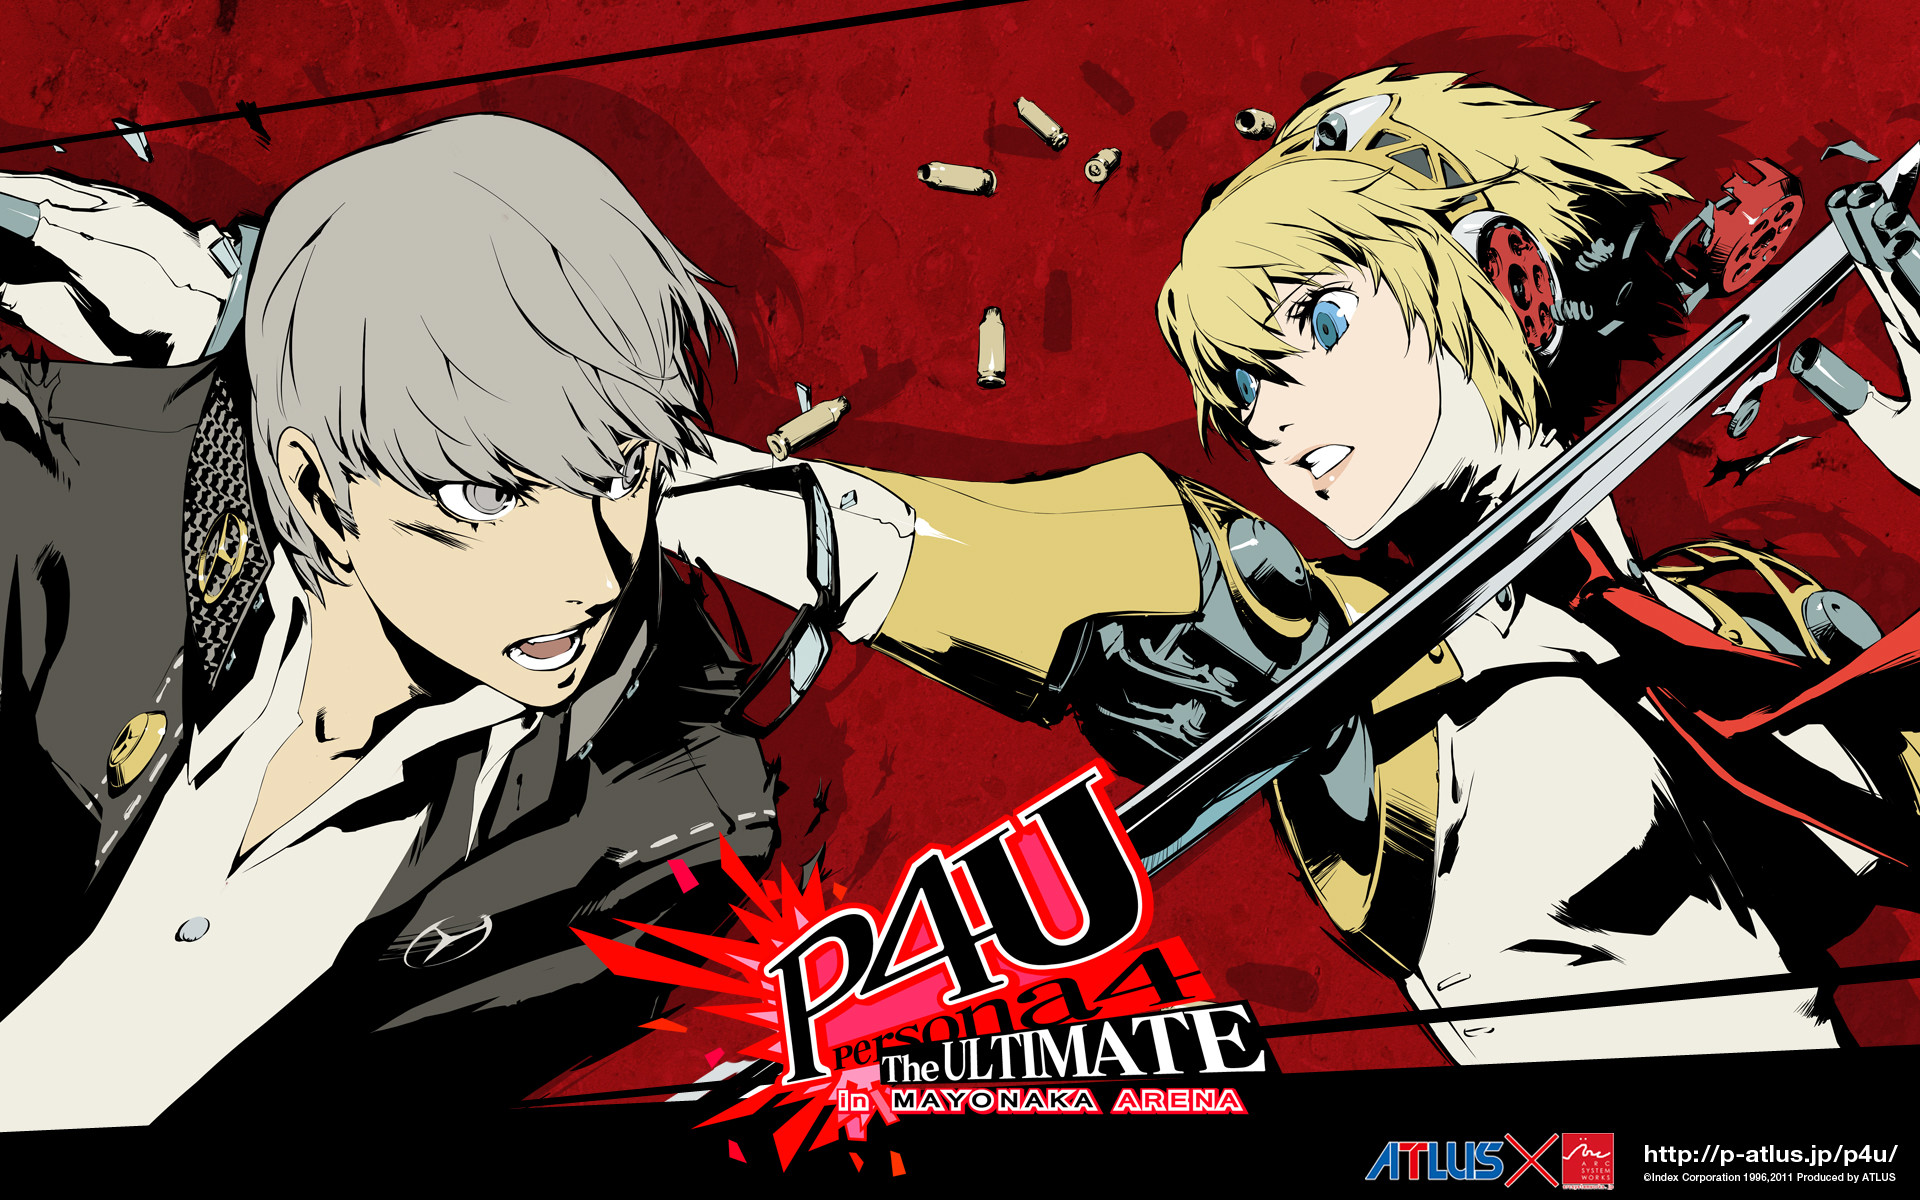 1920x1200 ... download Persona 4: The Ultimate In Mayonaka Arena image